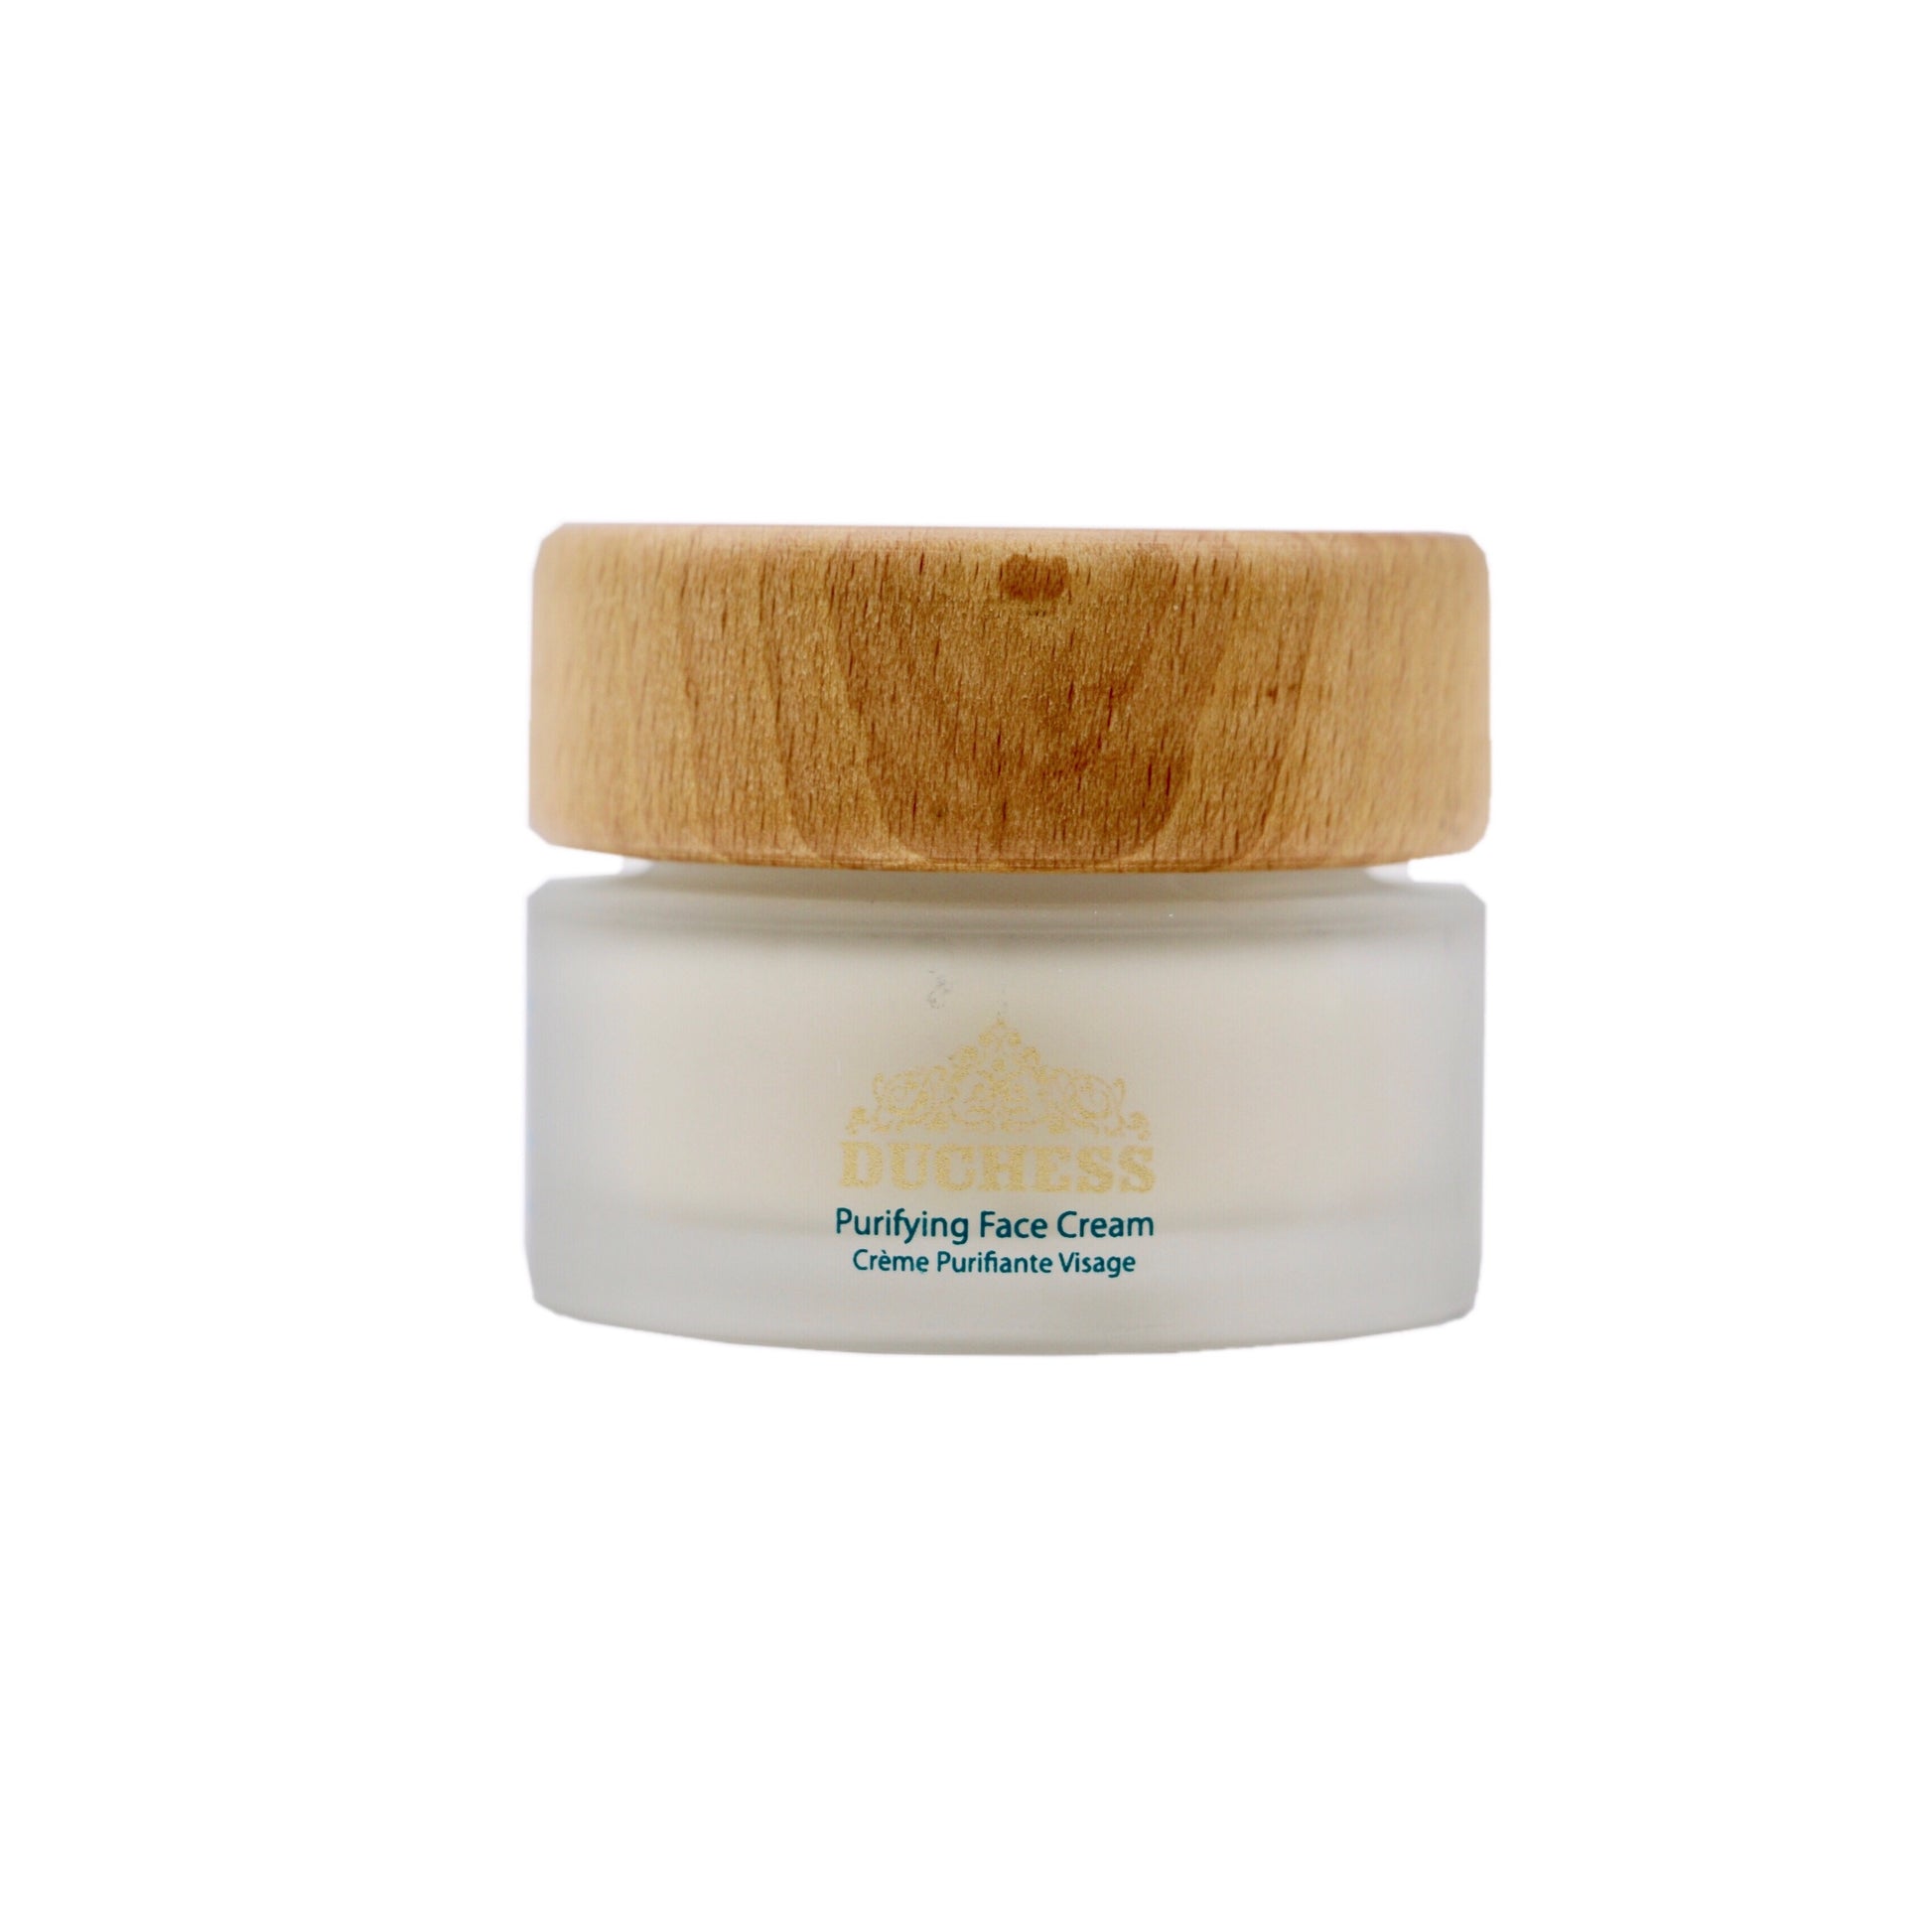 face cream for clear skin. It enhances skin tone even on problem skin